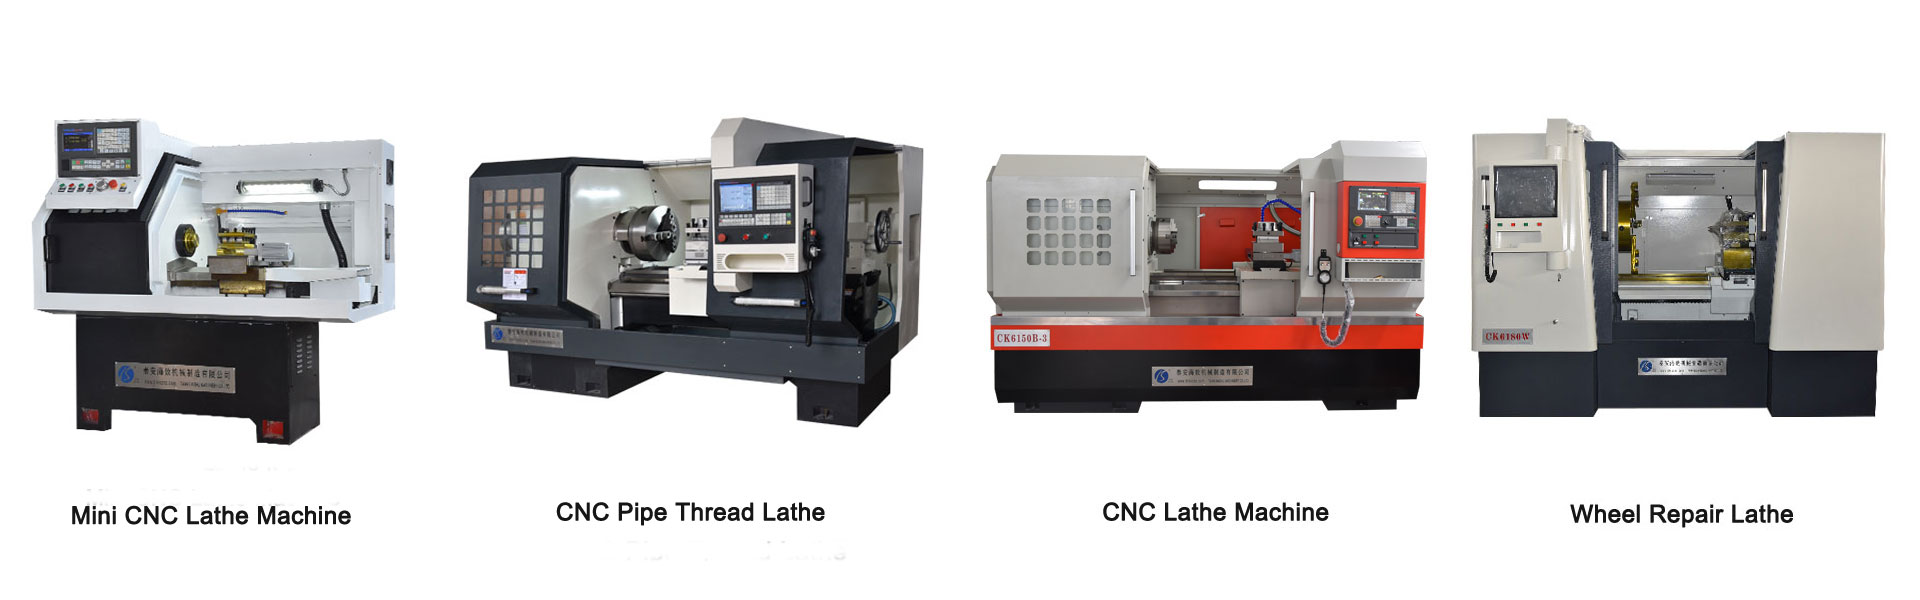 cnc machine products banner